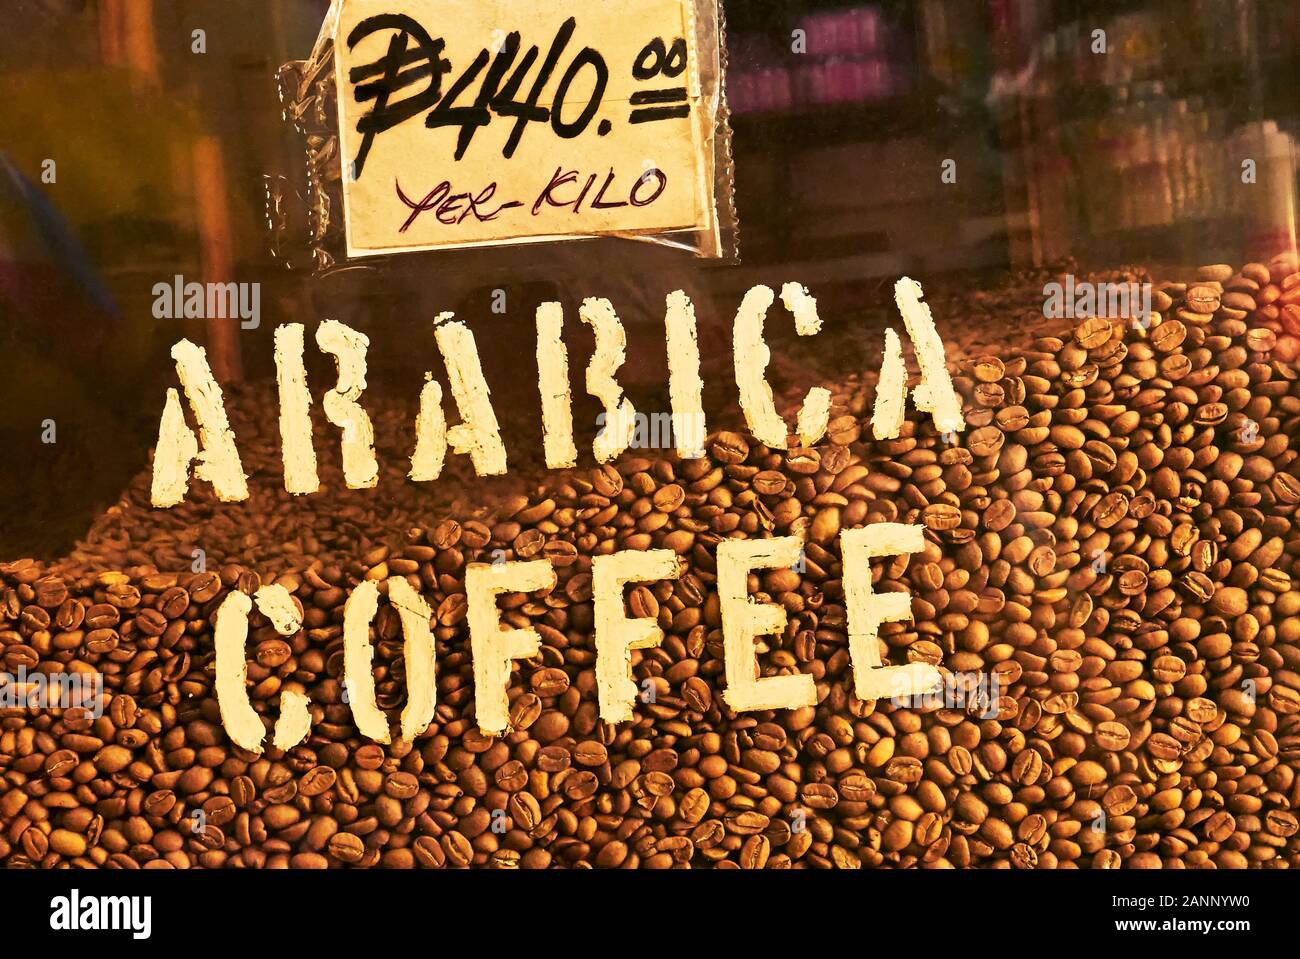 Roasted Arabica coffee beans for sale are displayed with price sign behind glass at a traditional store at Divisoria market in Manila, Philippines Stock Photo